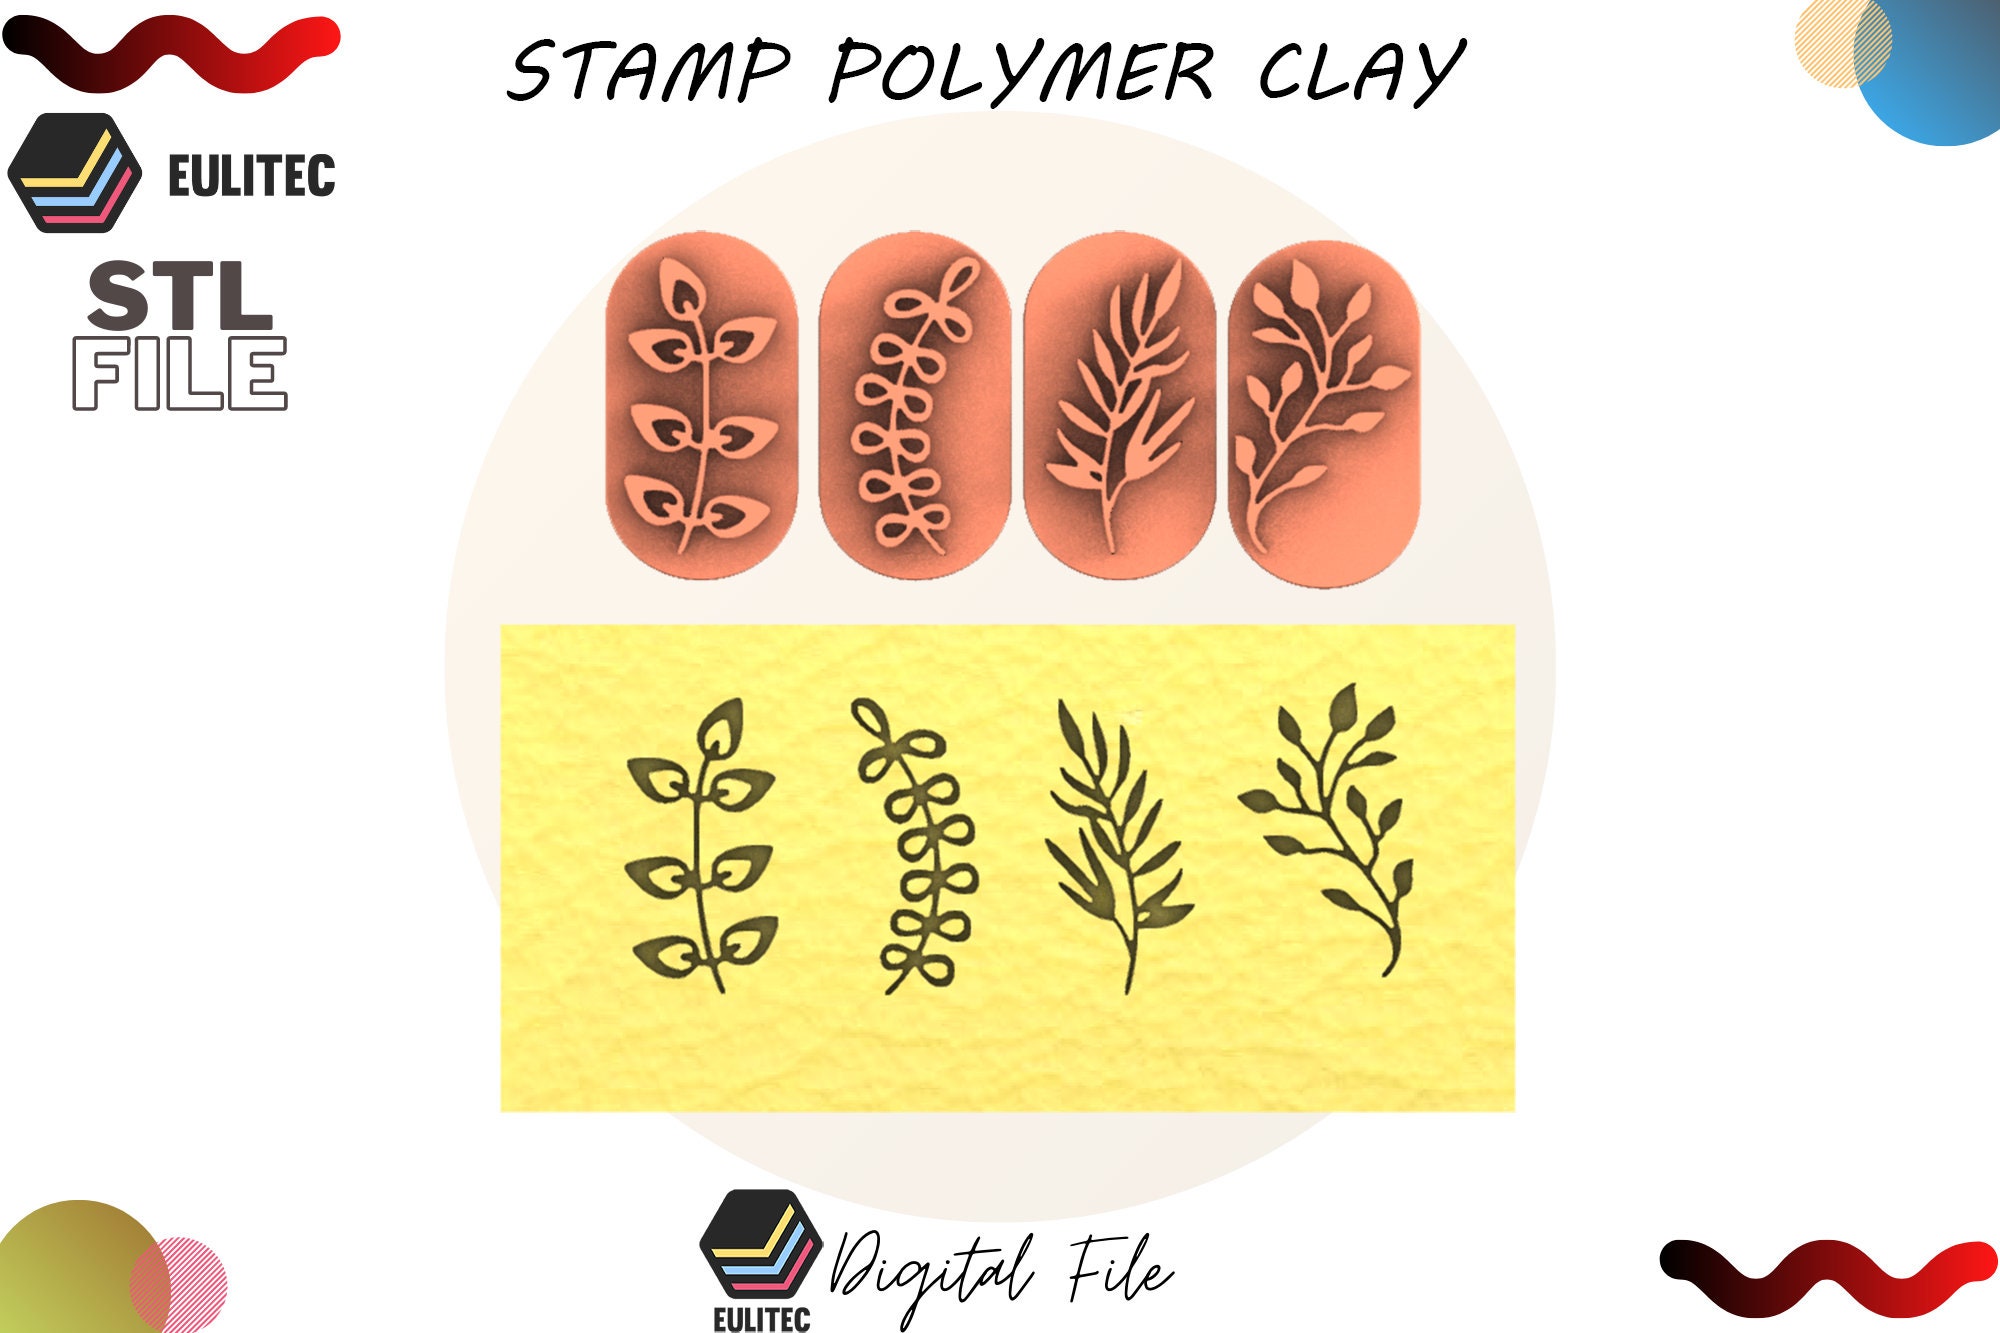 Polymer Clay Stamping Tutorial